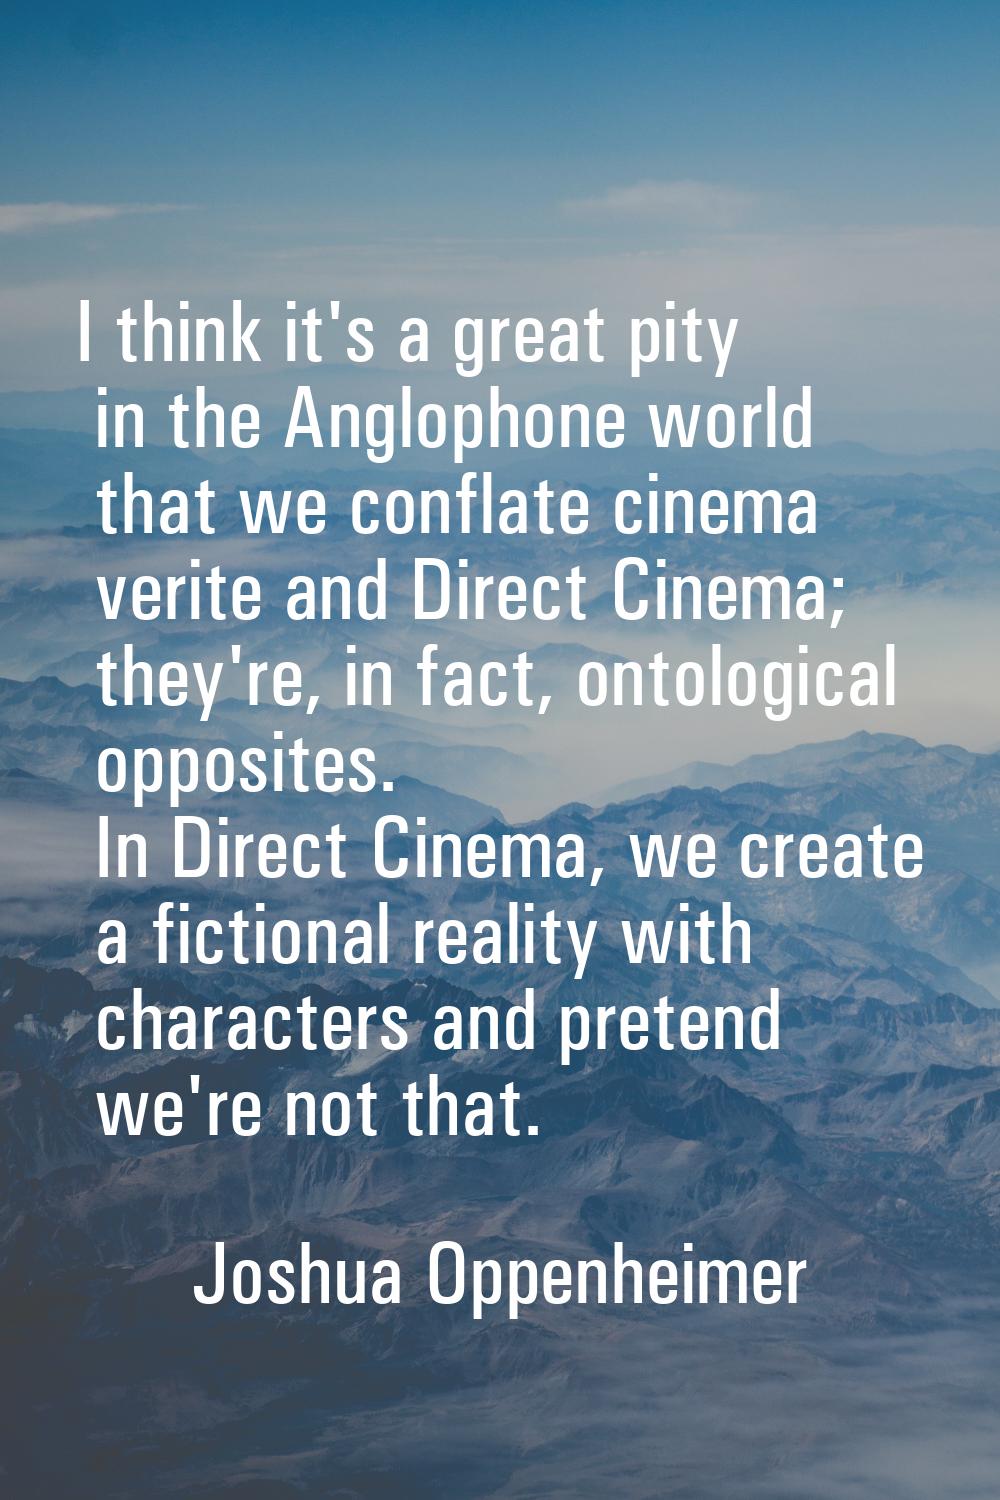 I think it's a great pity in the Anglophone world that we conflate cinema verite and Direct Cinema;